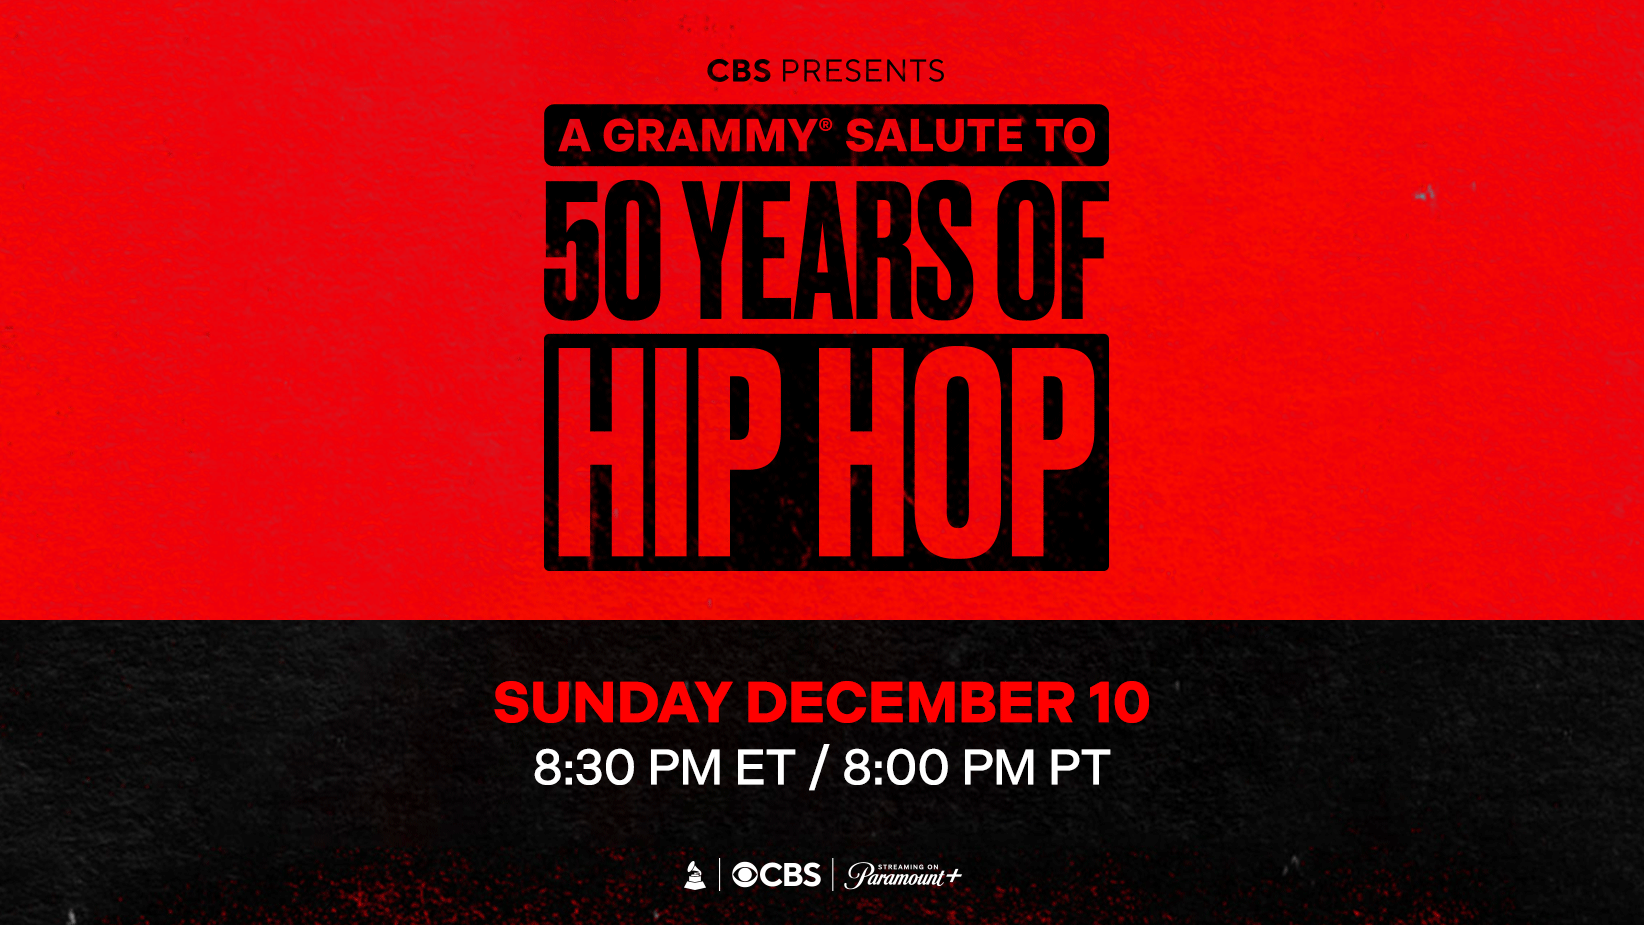 "A GRAMMY Salute To 50 Years Of Hip-Hop" Airs Sunday, Dec. 10: Save The Date